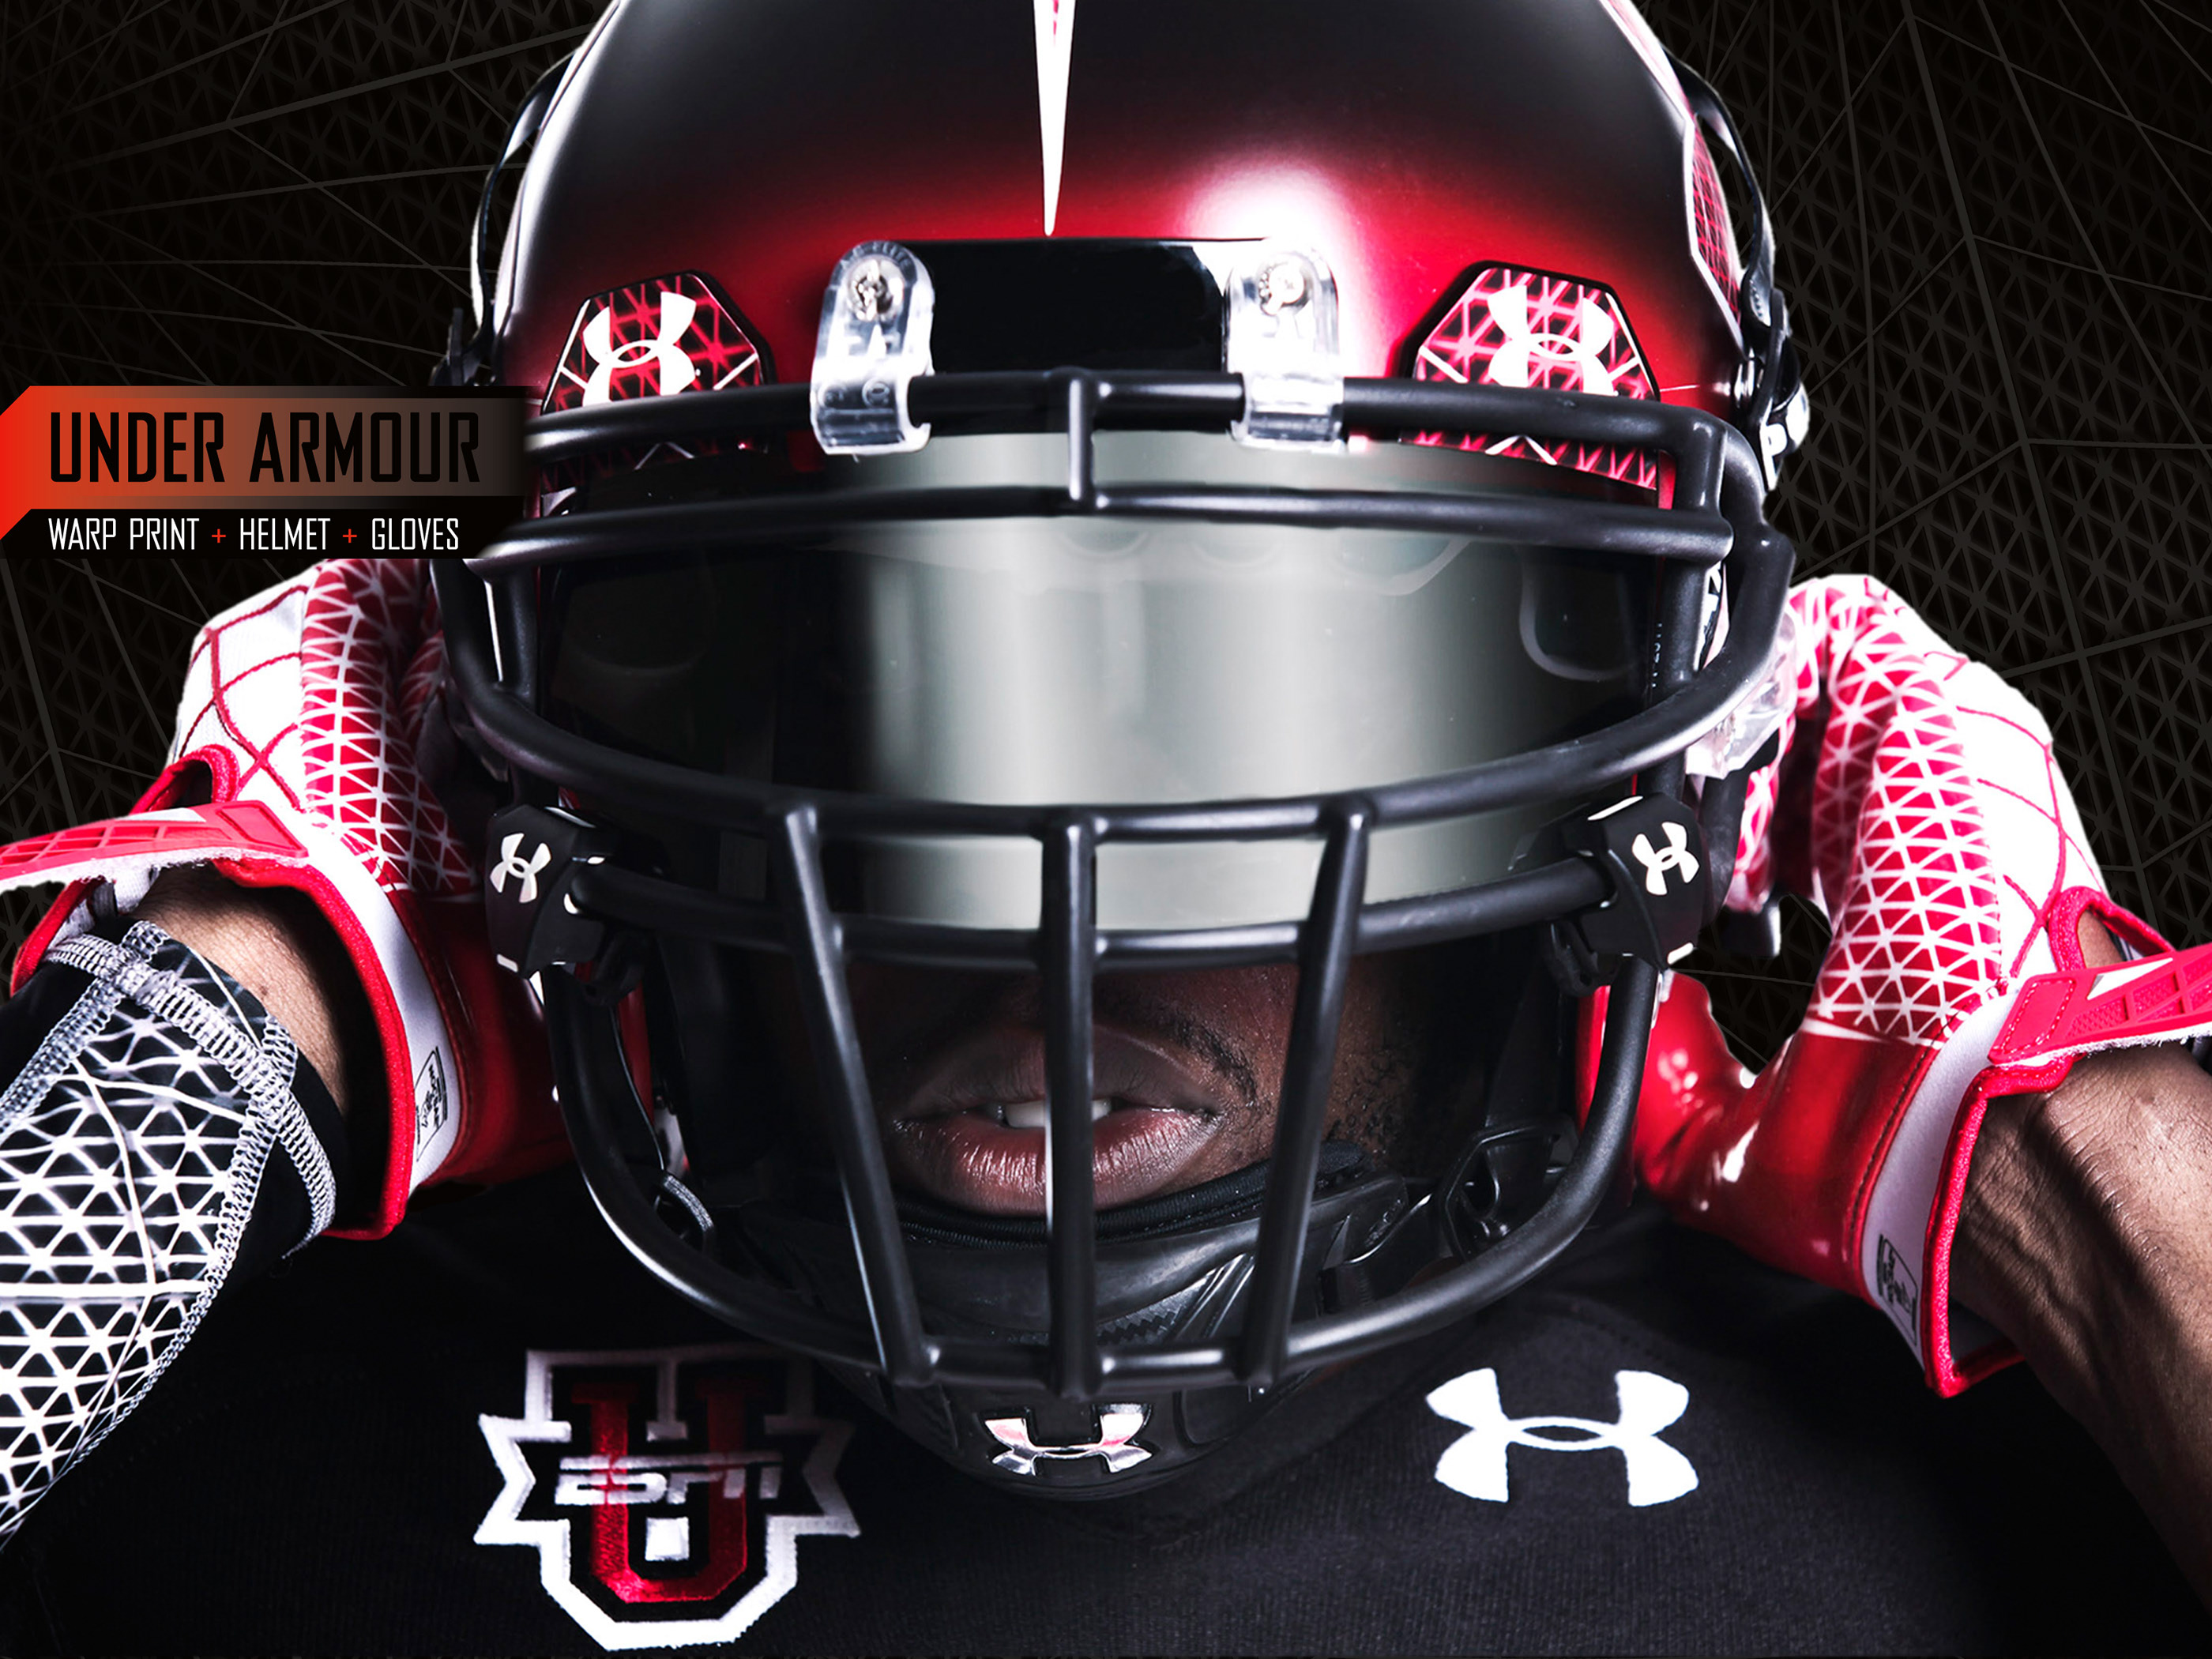 Under Armour All American Football Concept / on Behance